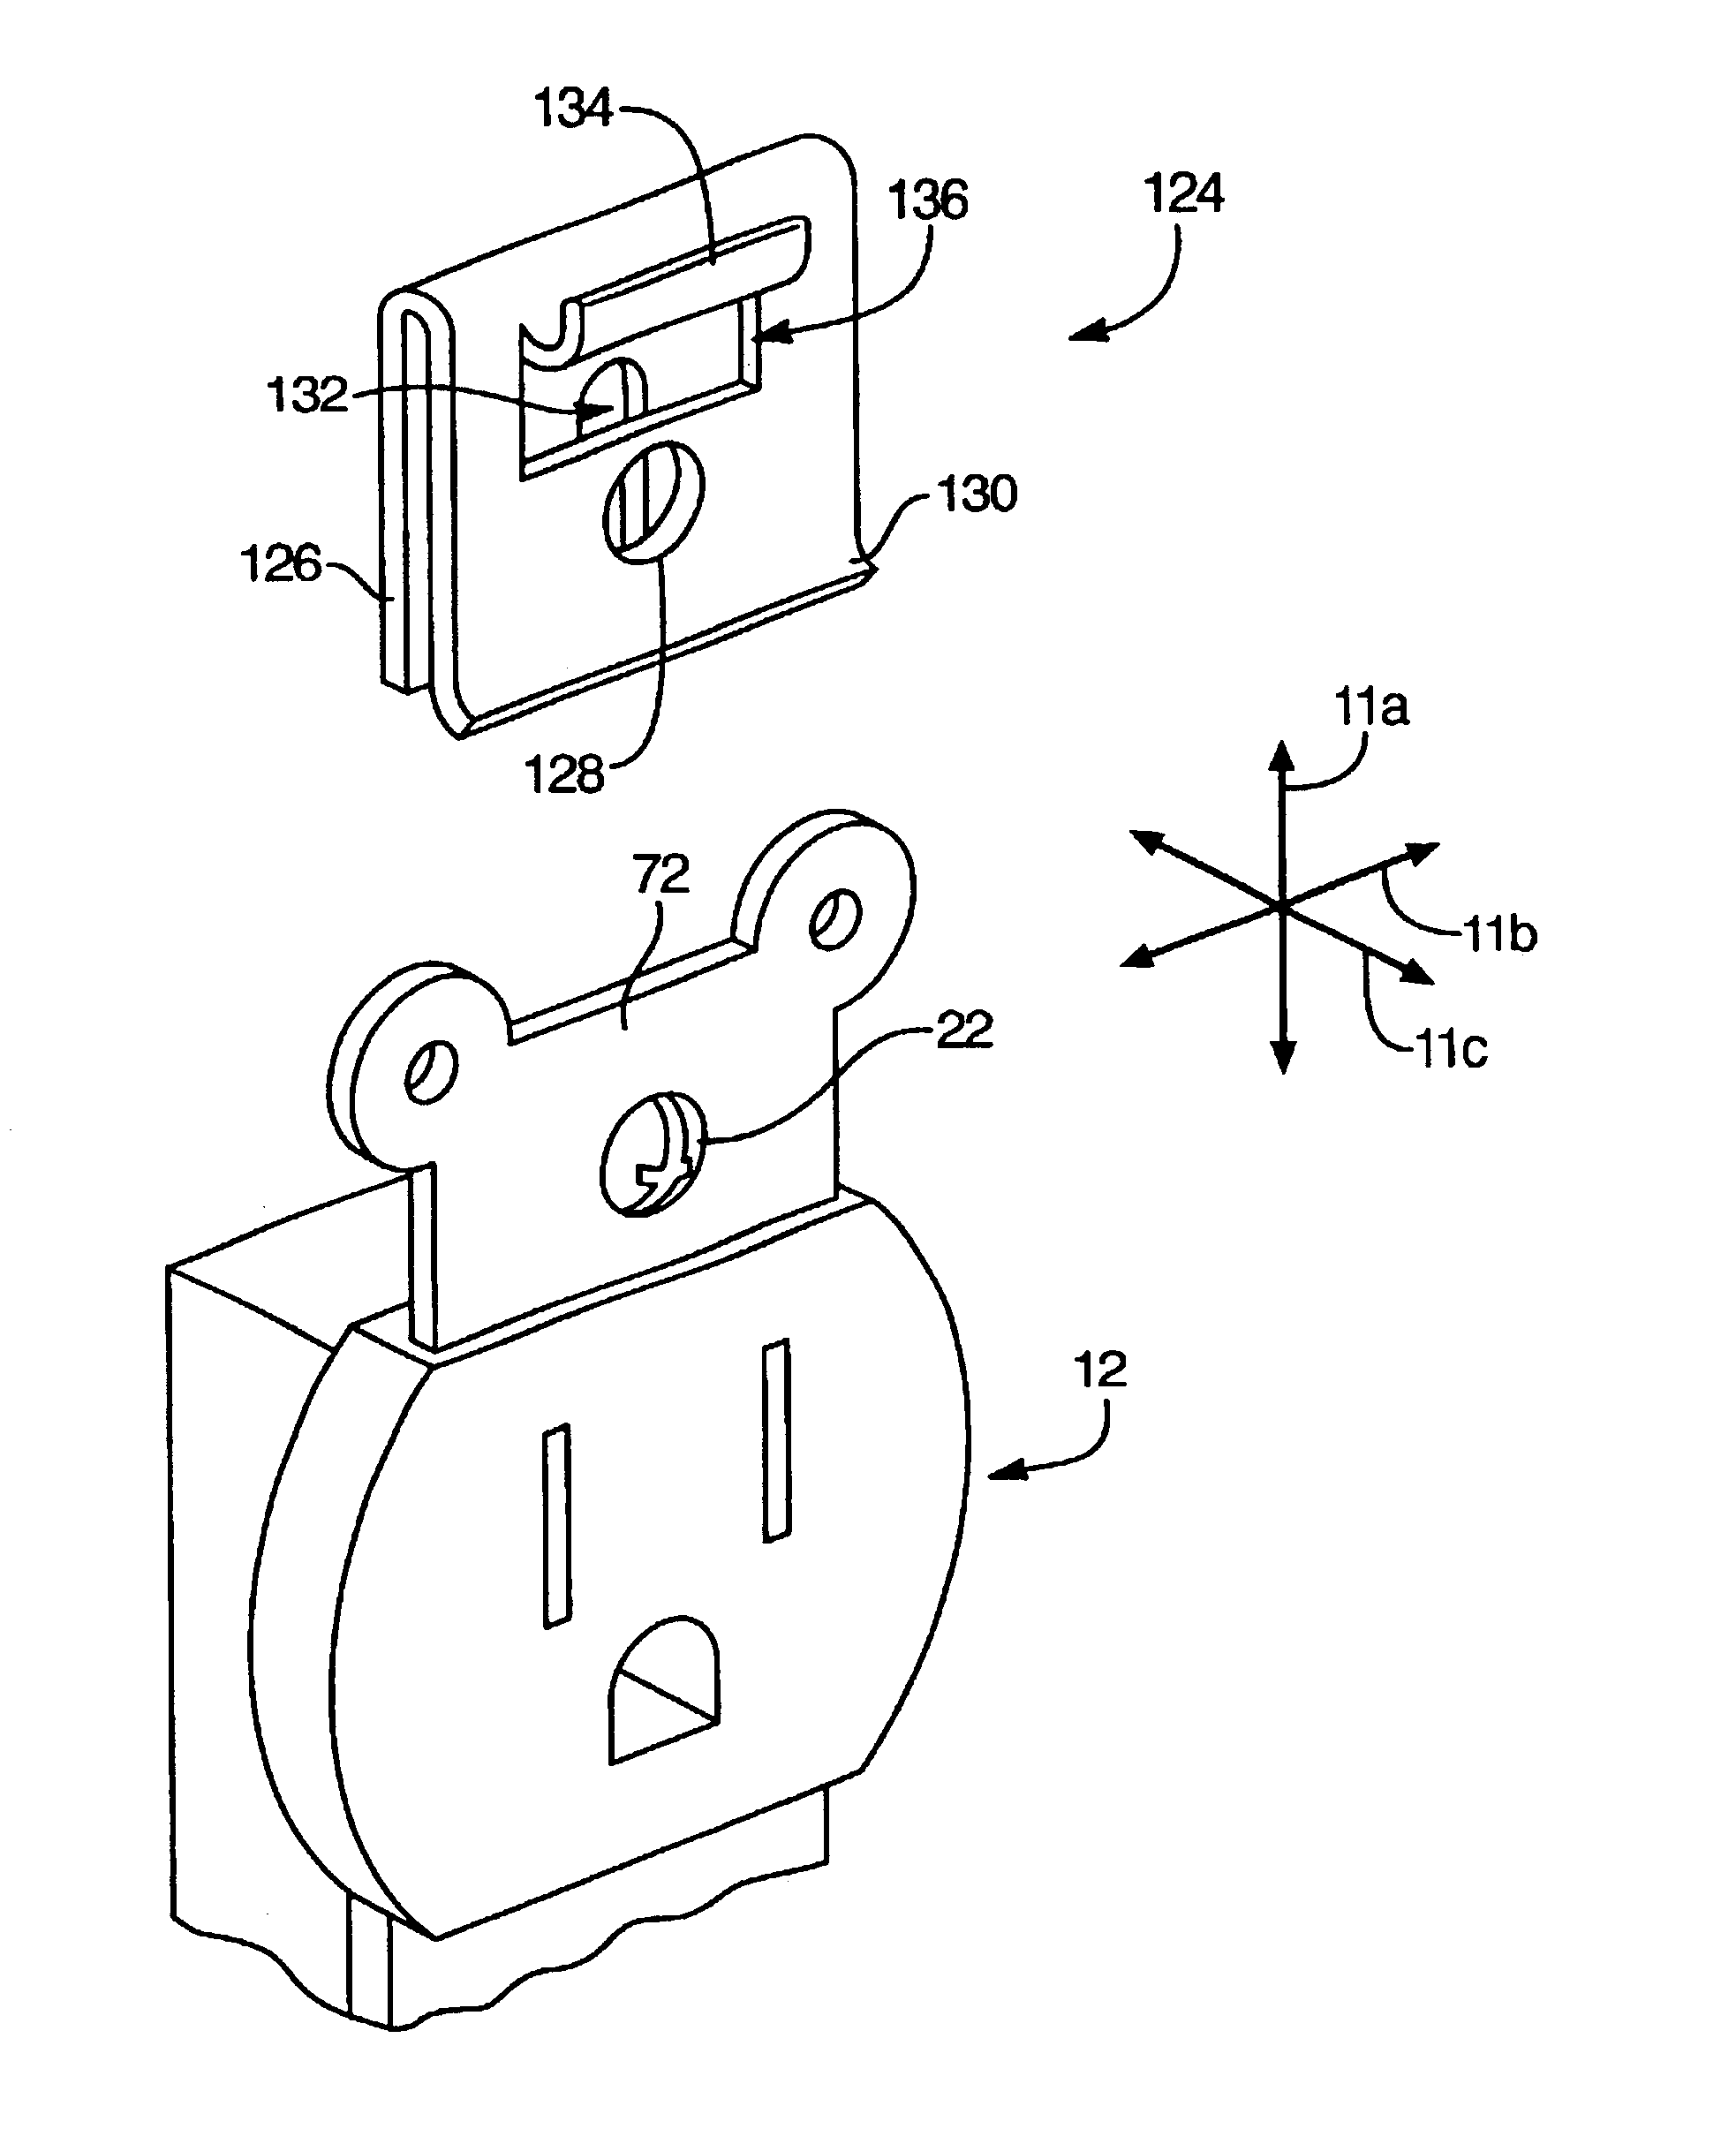 Deflecting securement anchor for electrical fixtures